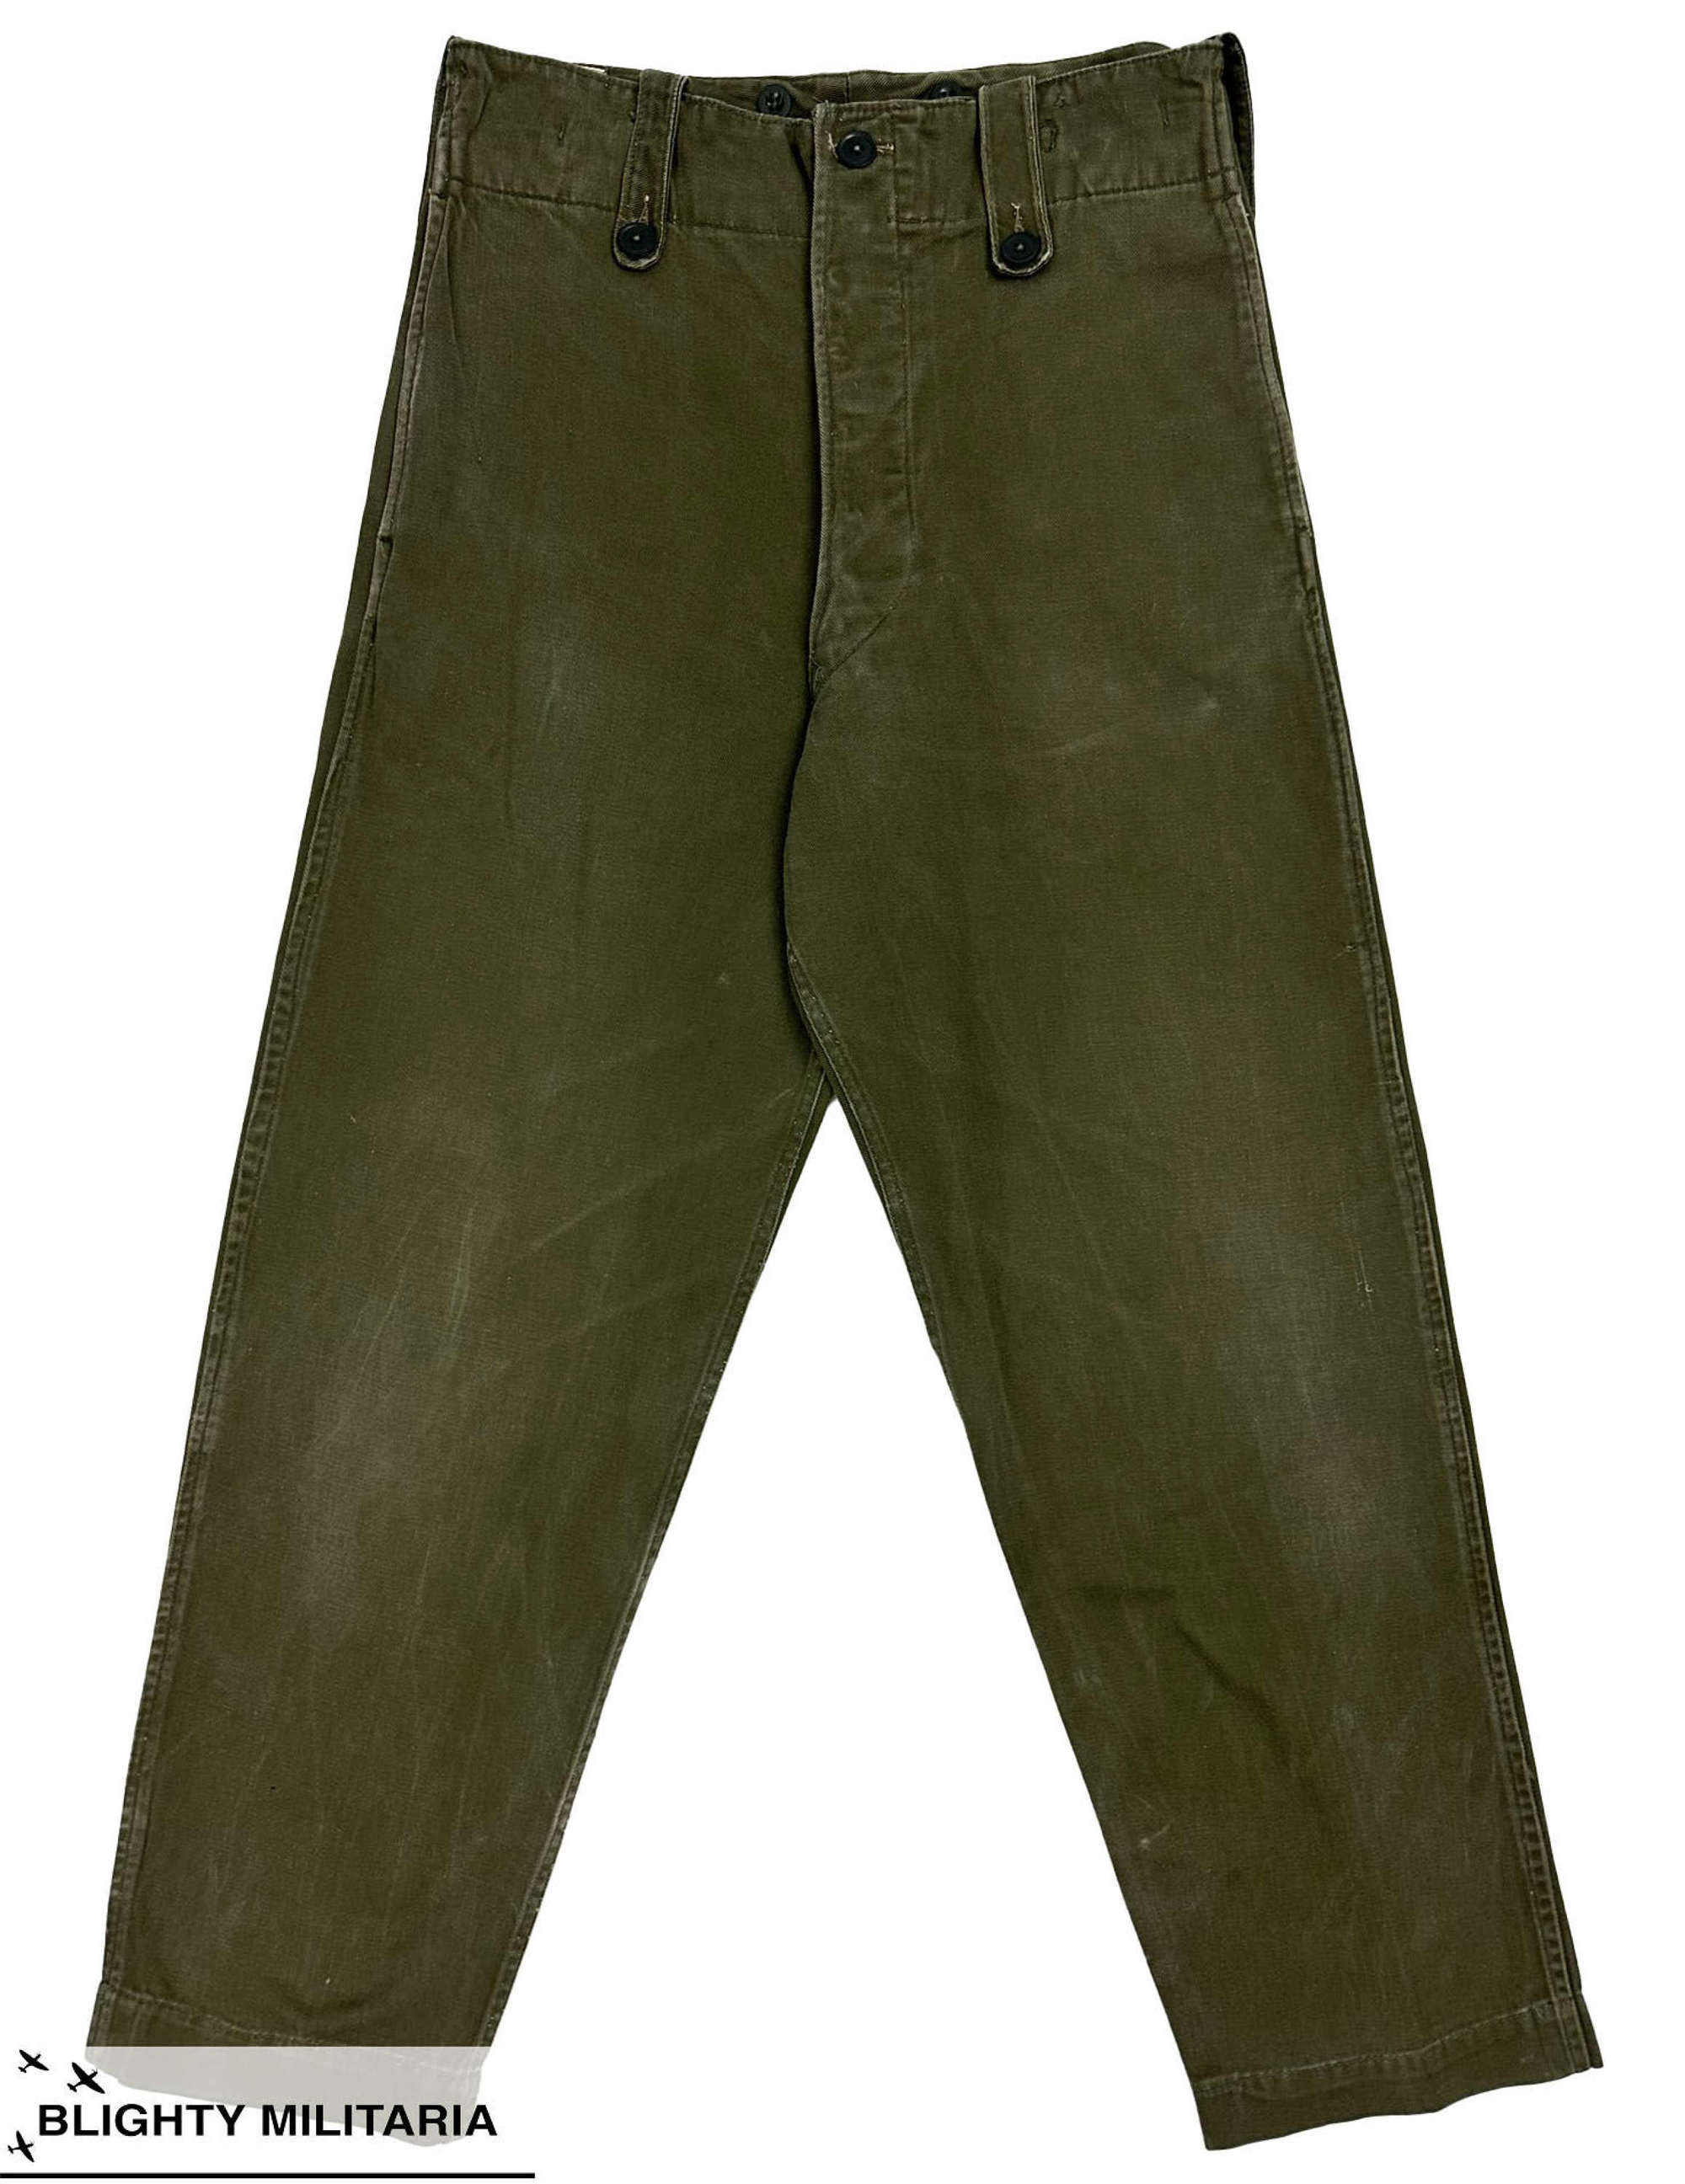 Original 1964 Dated British Army Overall Green Trousers - Size 2 32x29